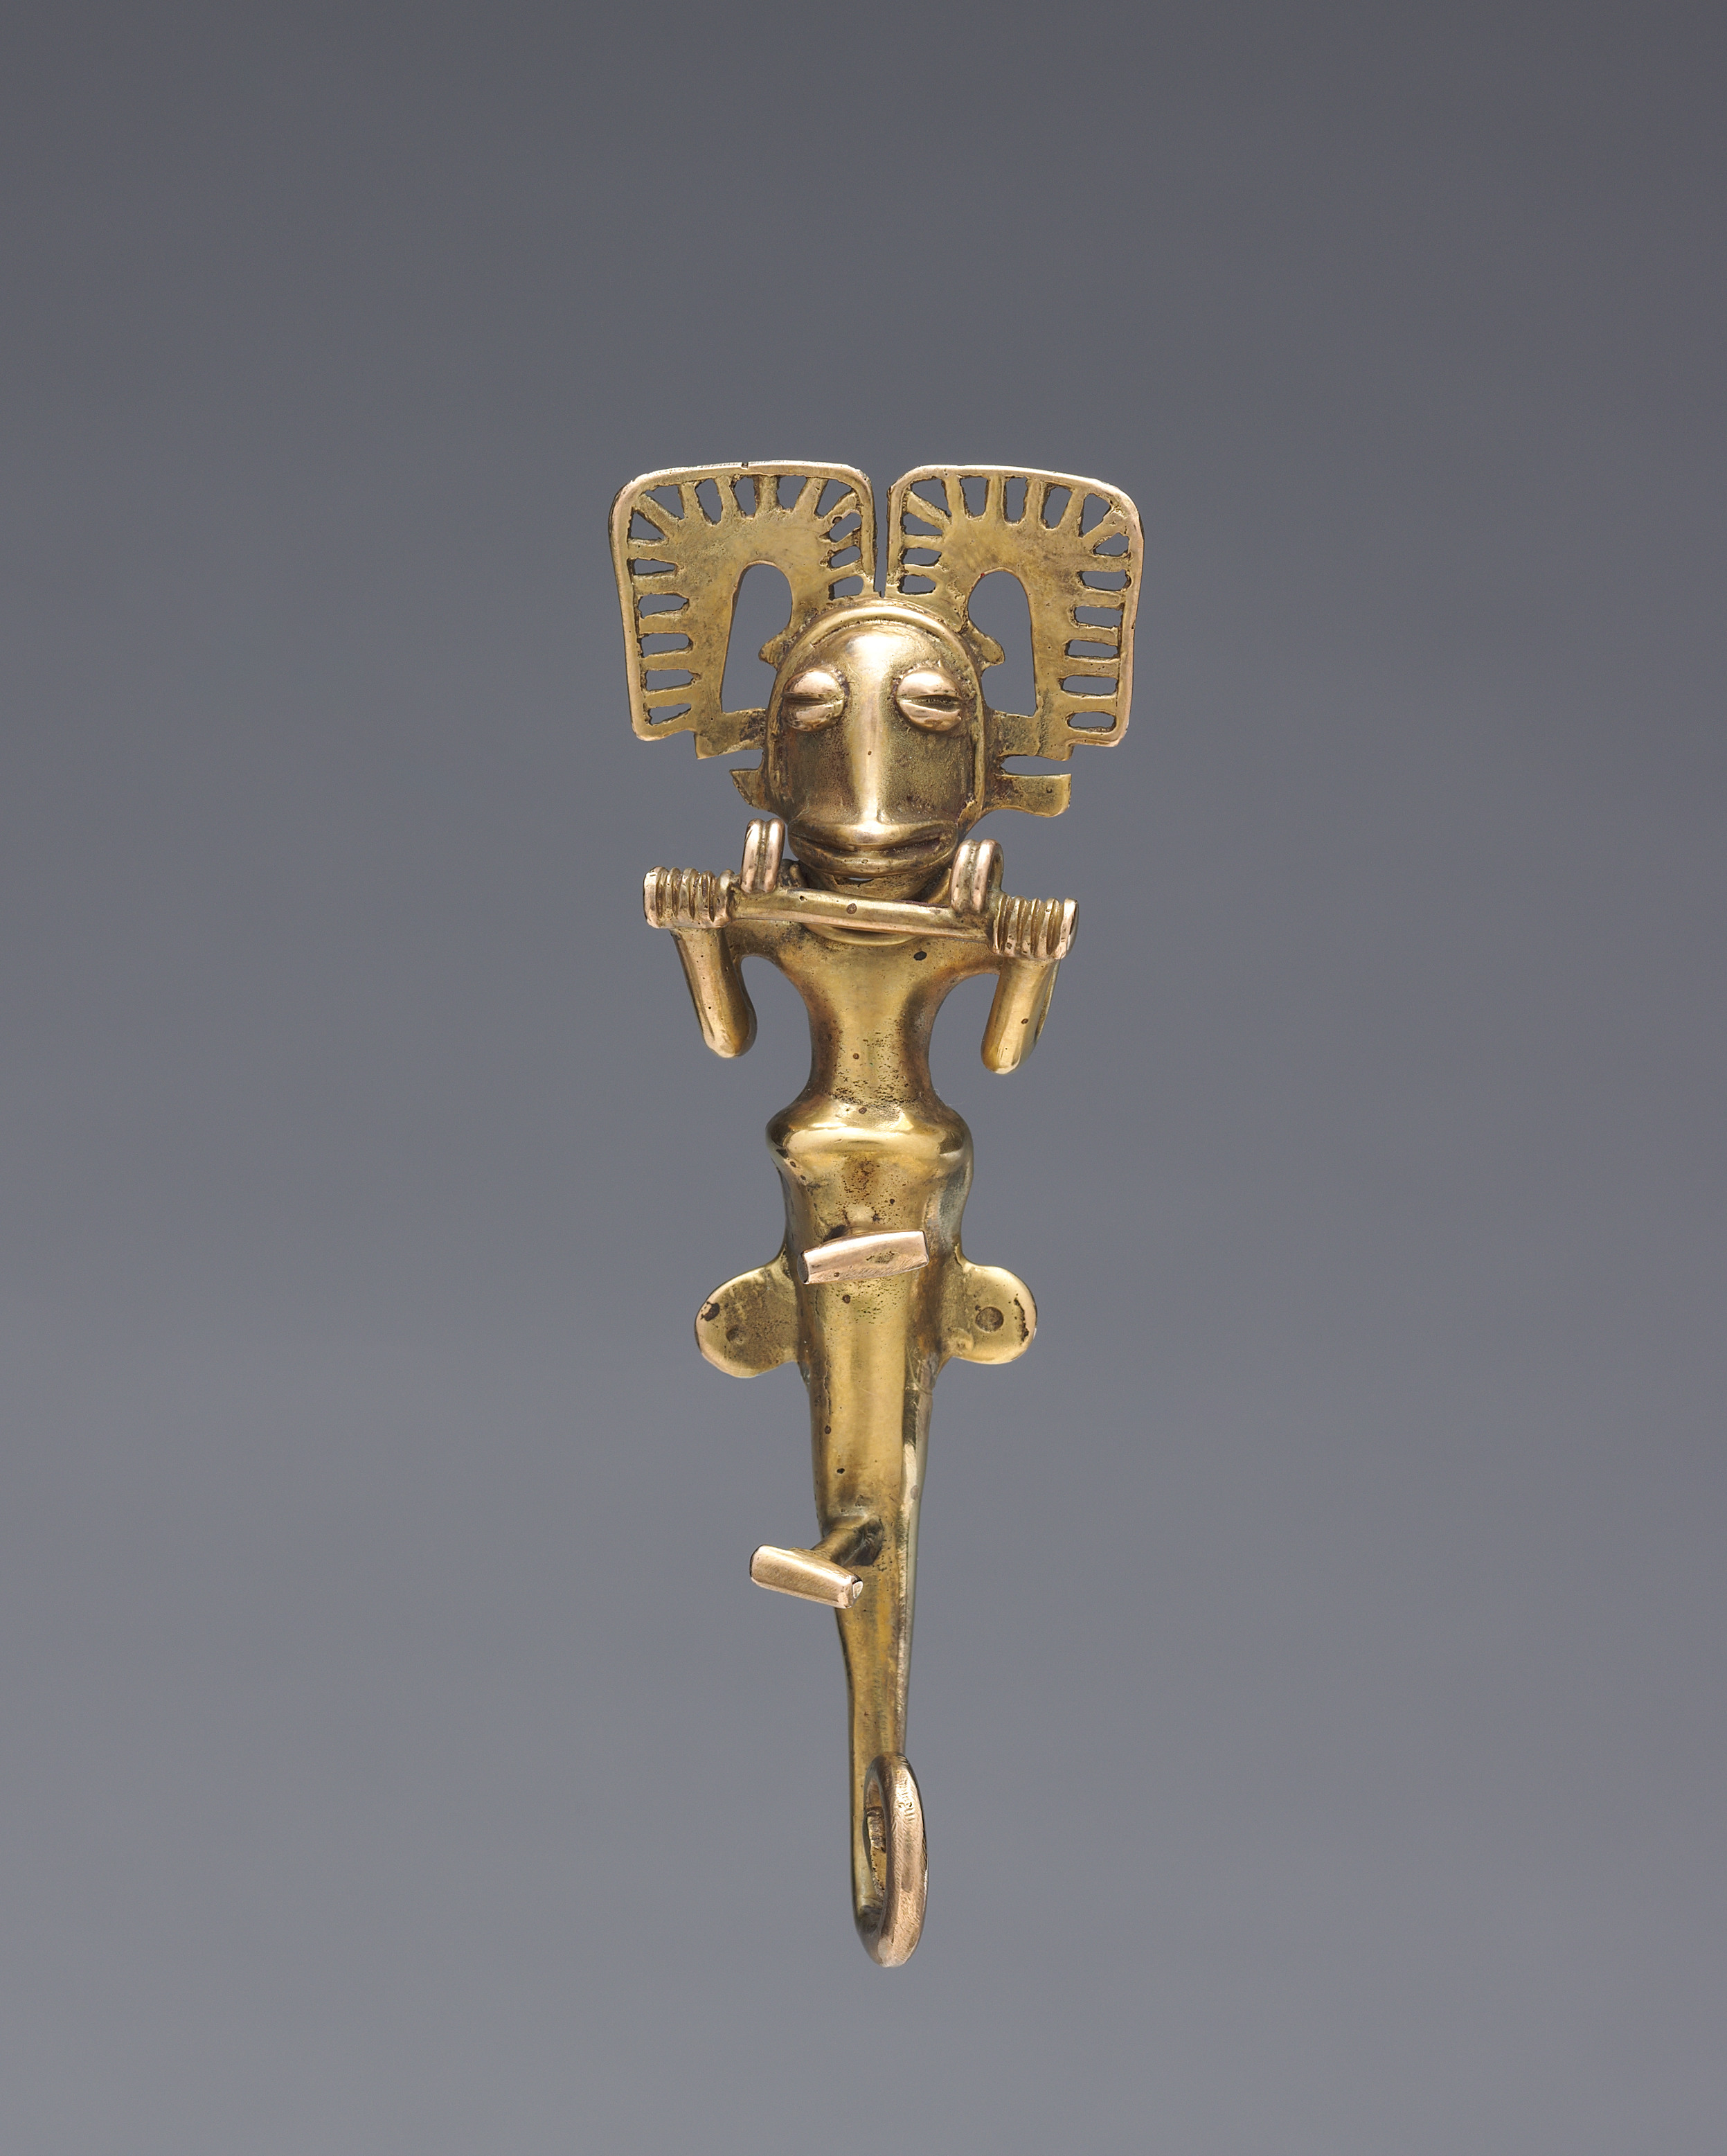 Ancient gold pendant featuring a figure with the face of a fish discovered in Panama, c. 5th-7th century CE.jpg